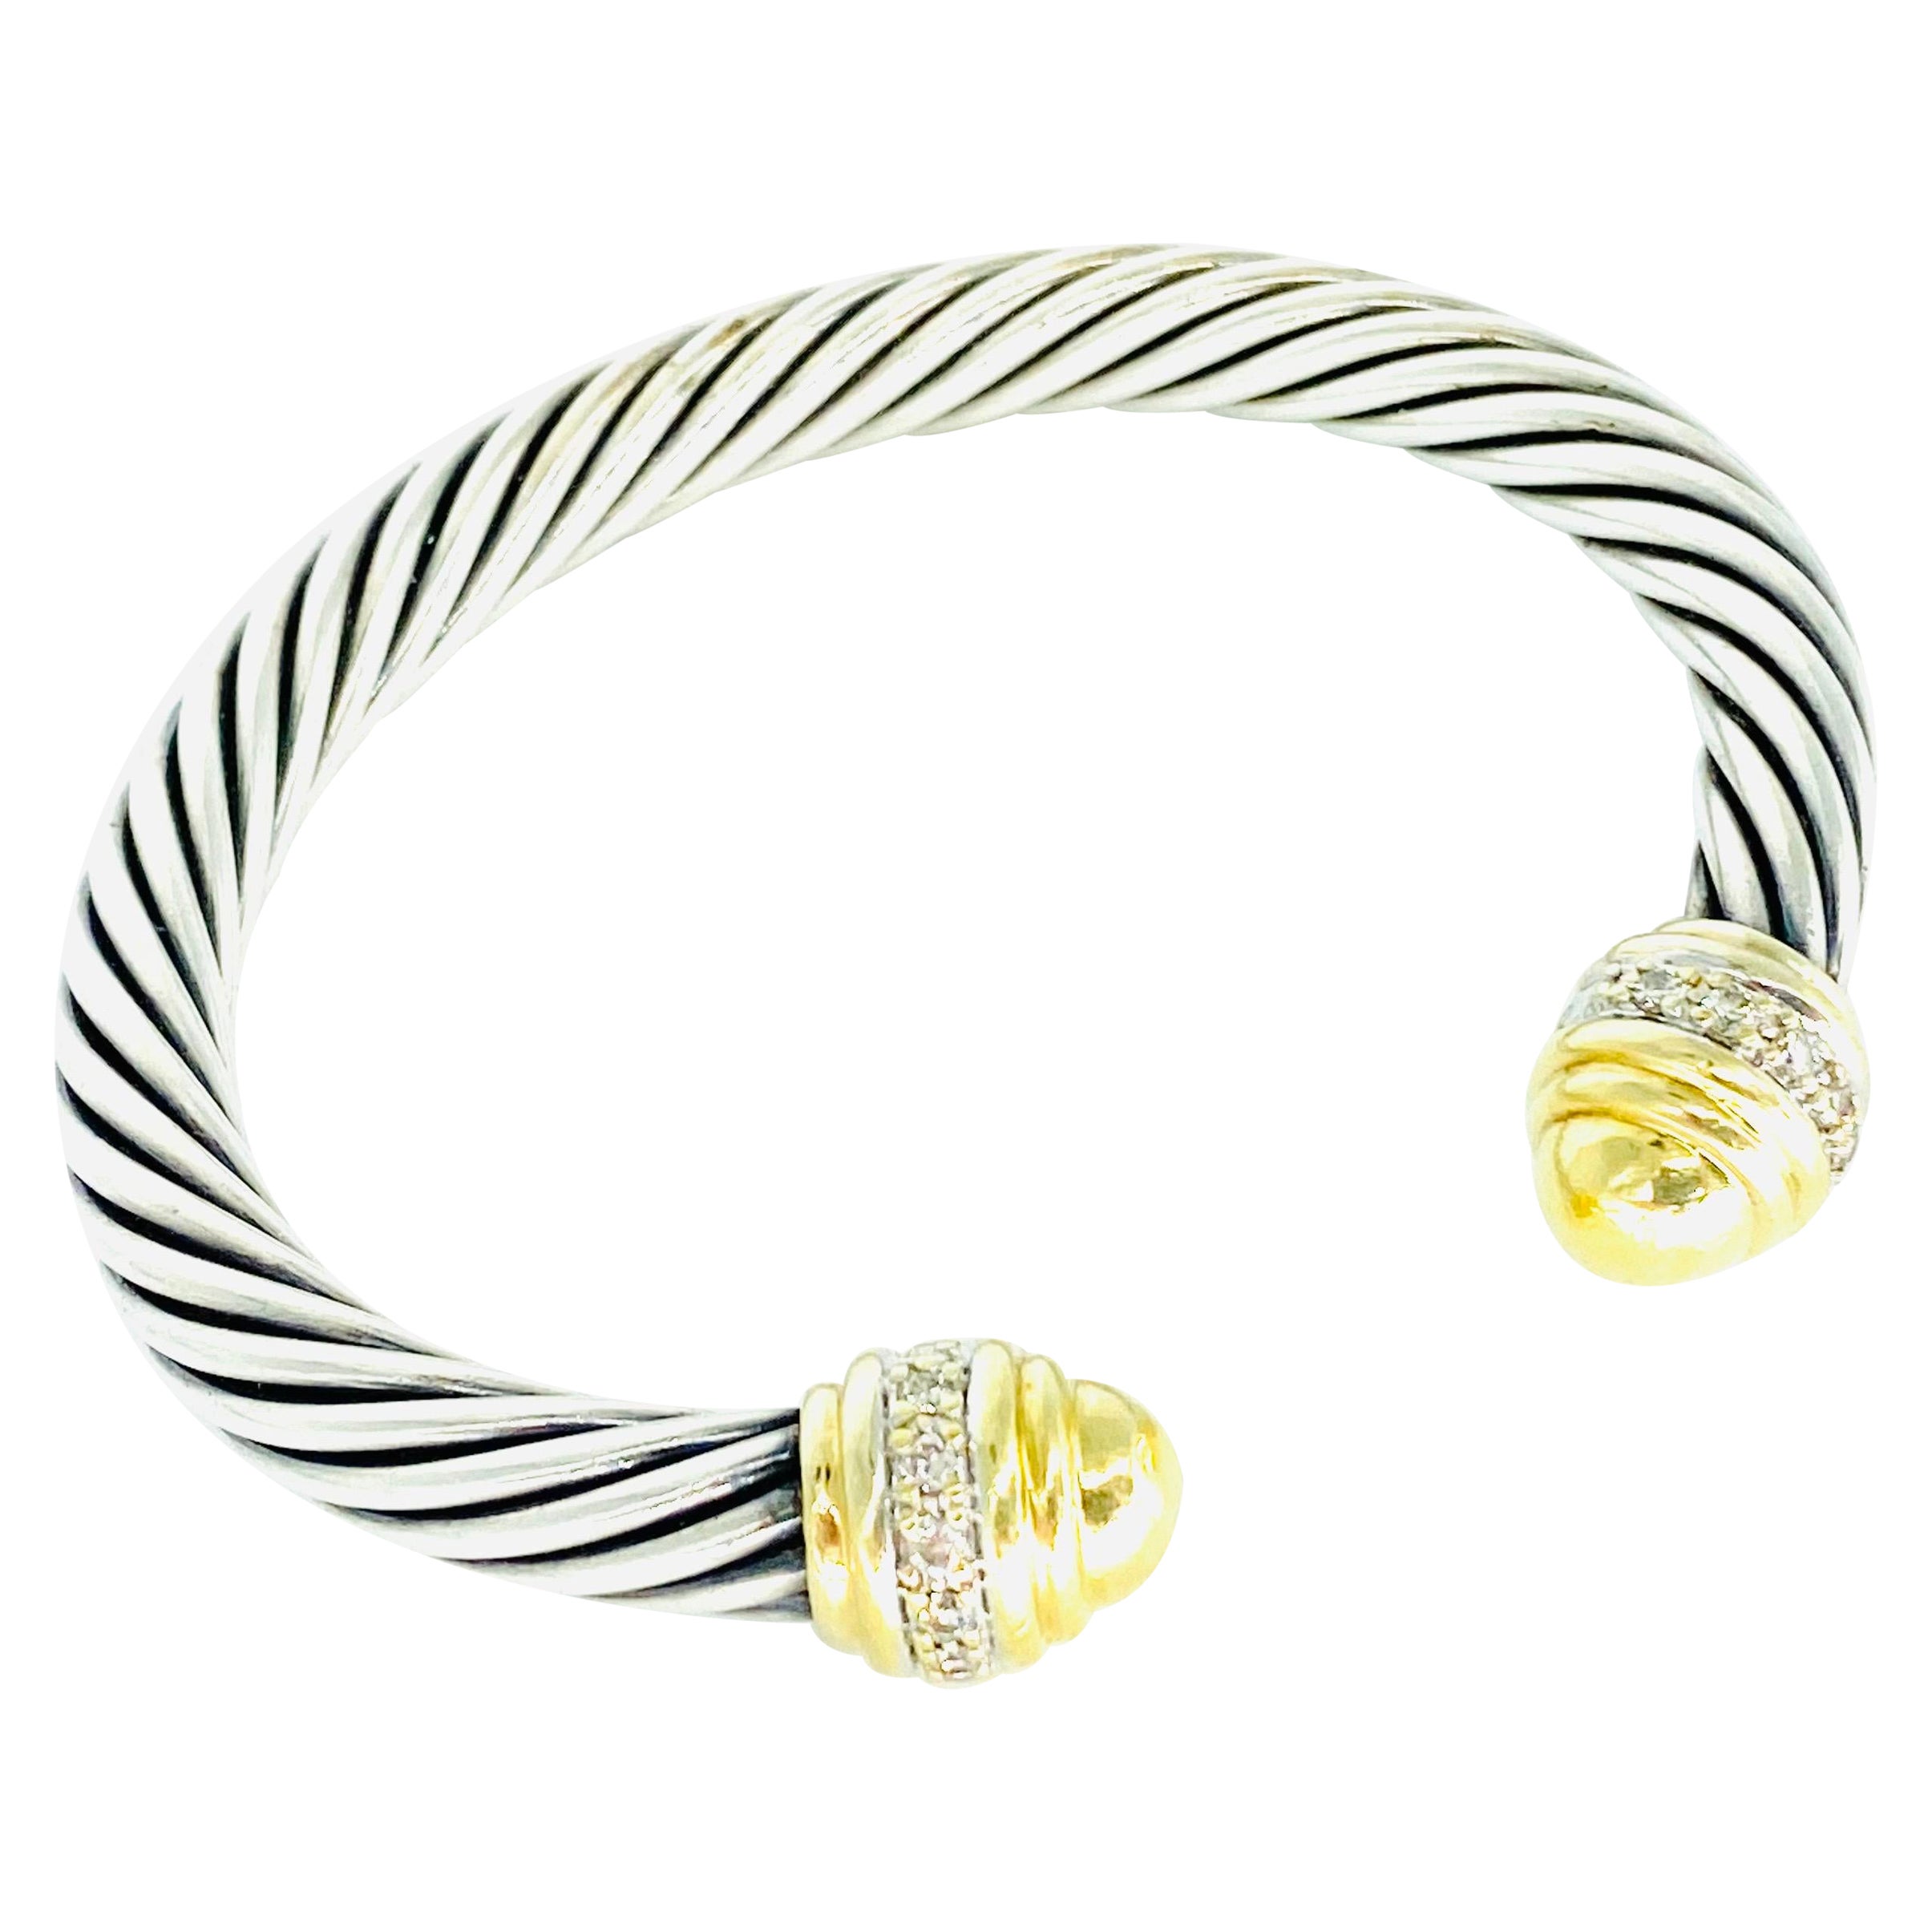 David Yurman Cable Bracelet in Silver/18k Gold with Diamonds Bangle For Sale